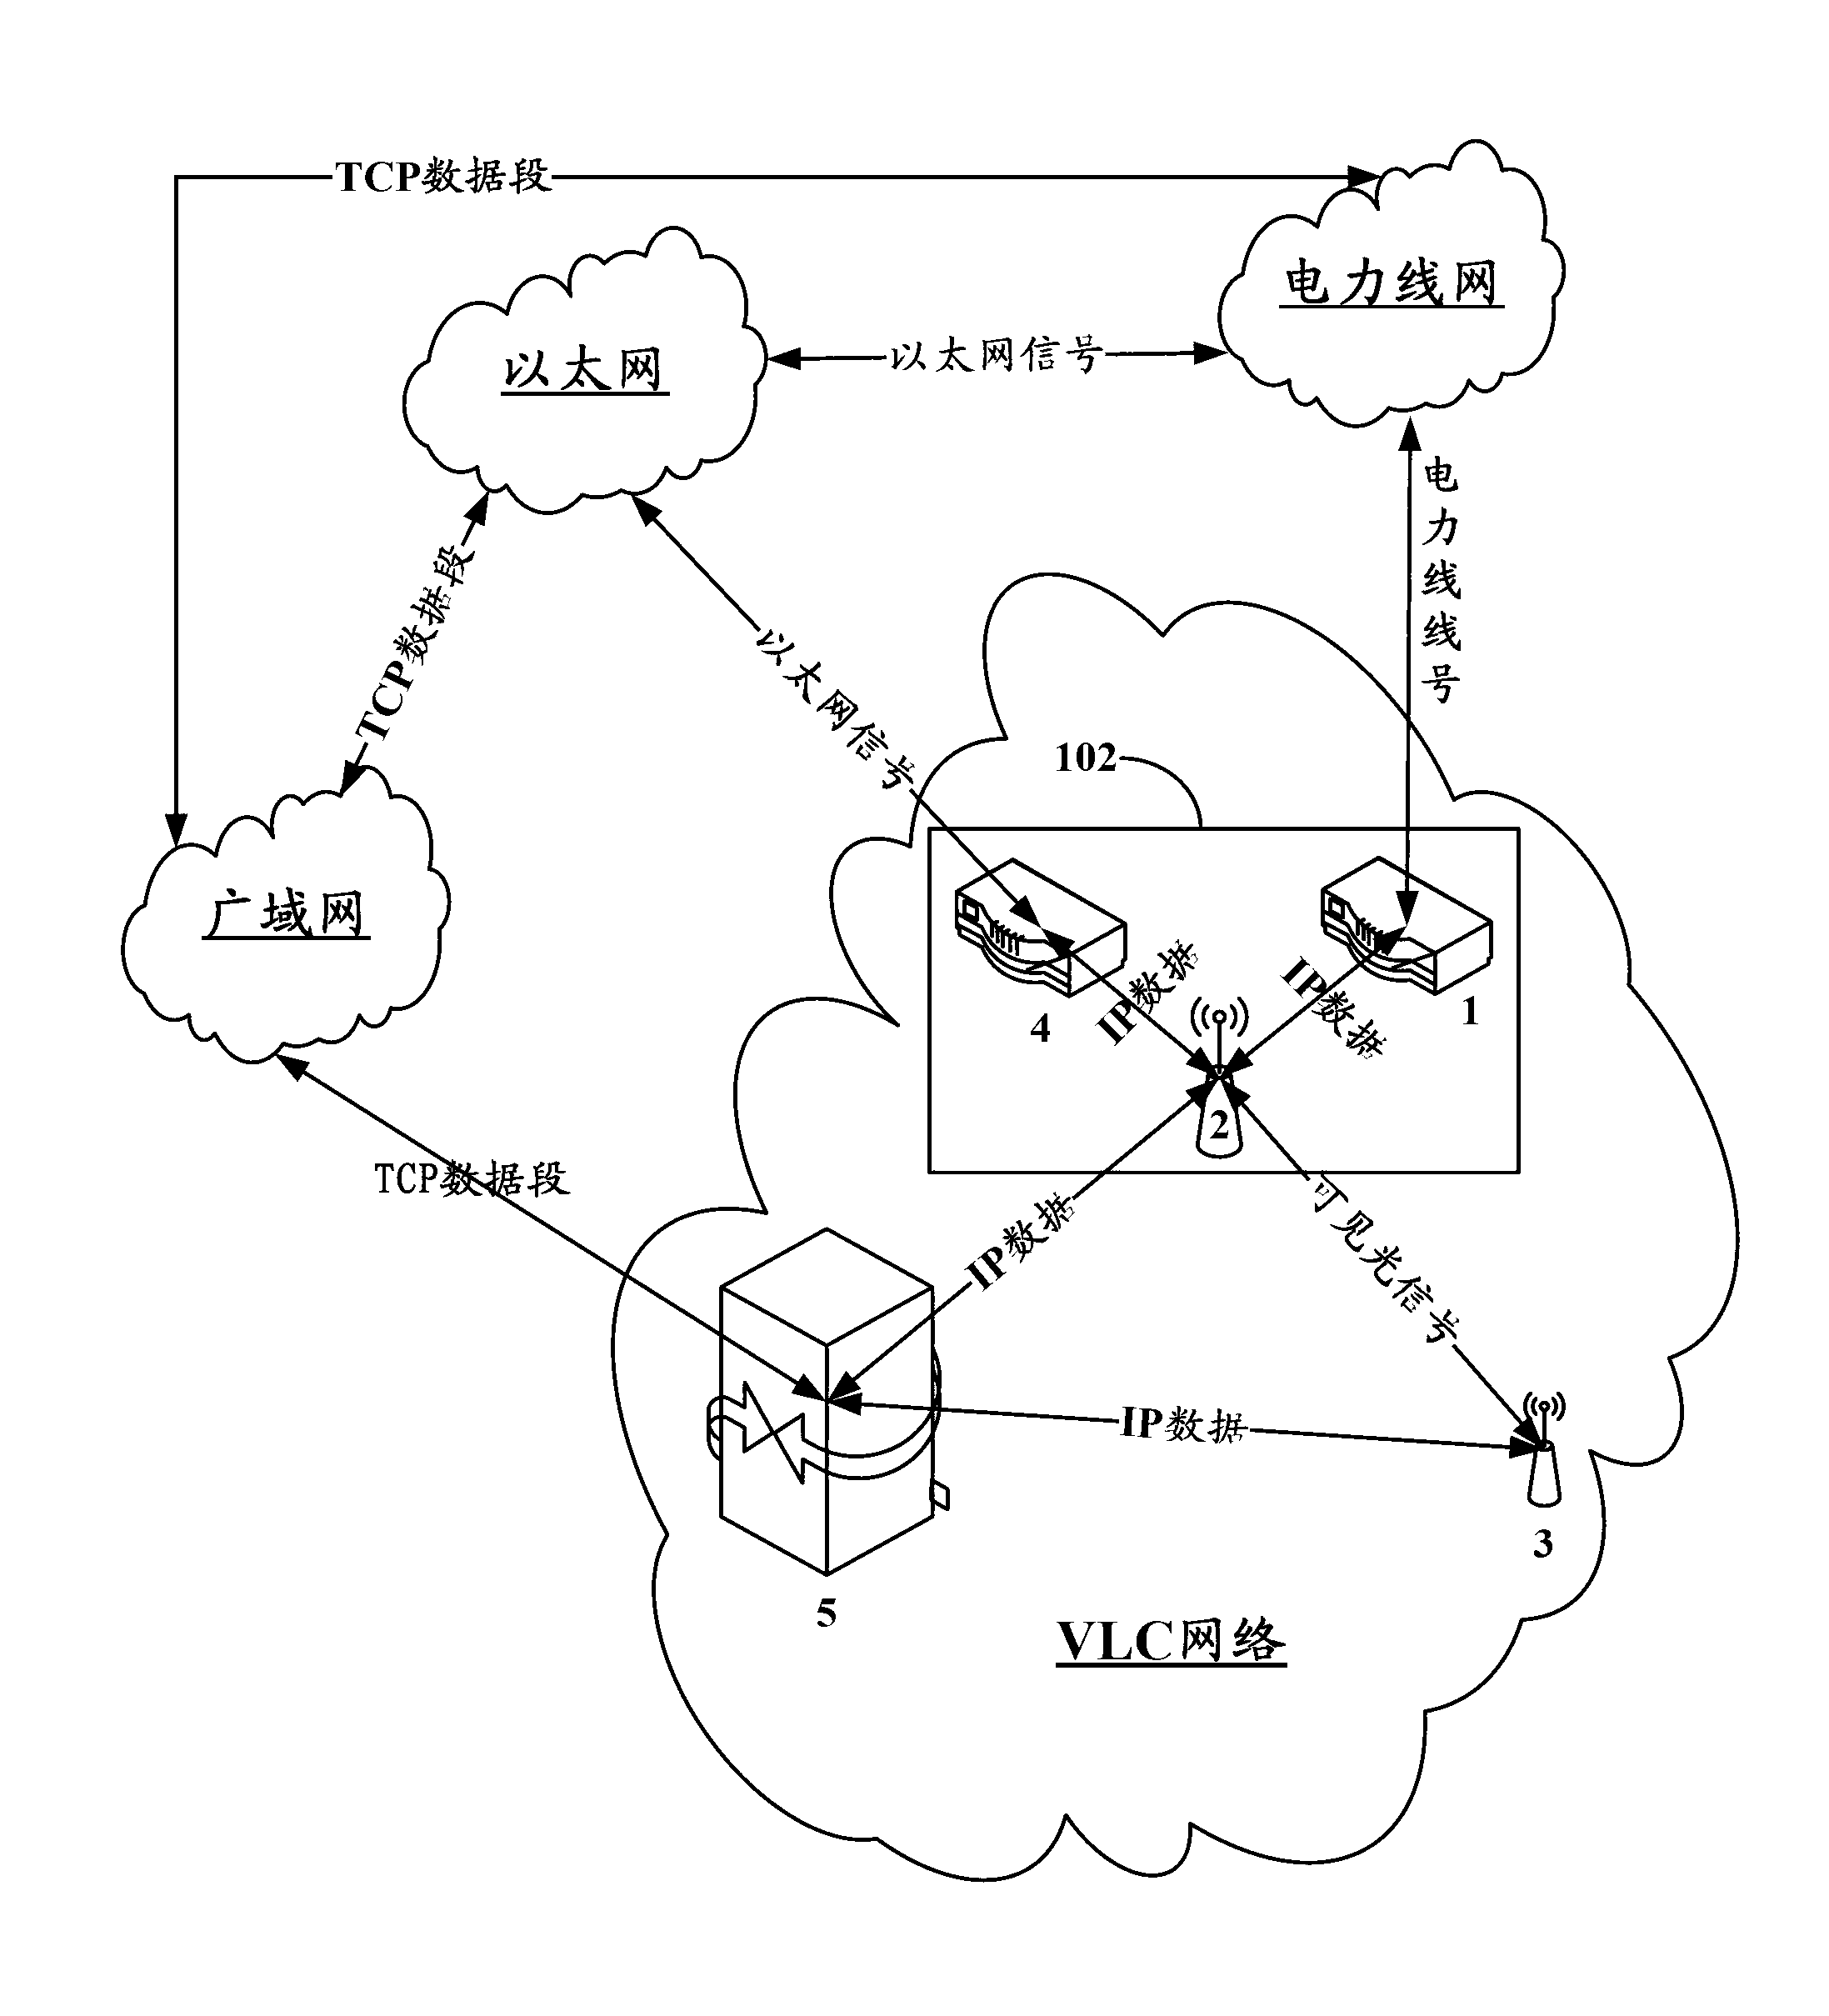 Method and system for transparently transmitting full-IP (internet protocol) visible light data